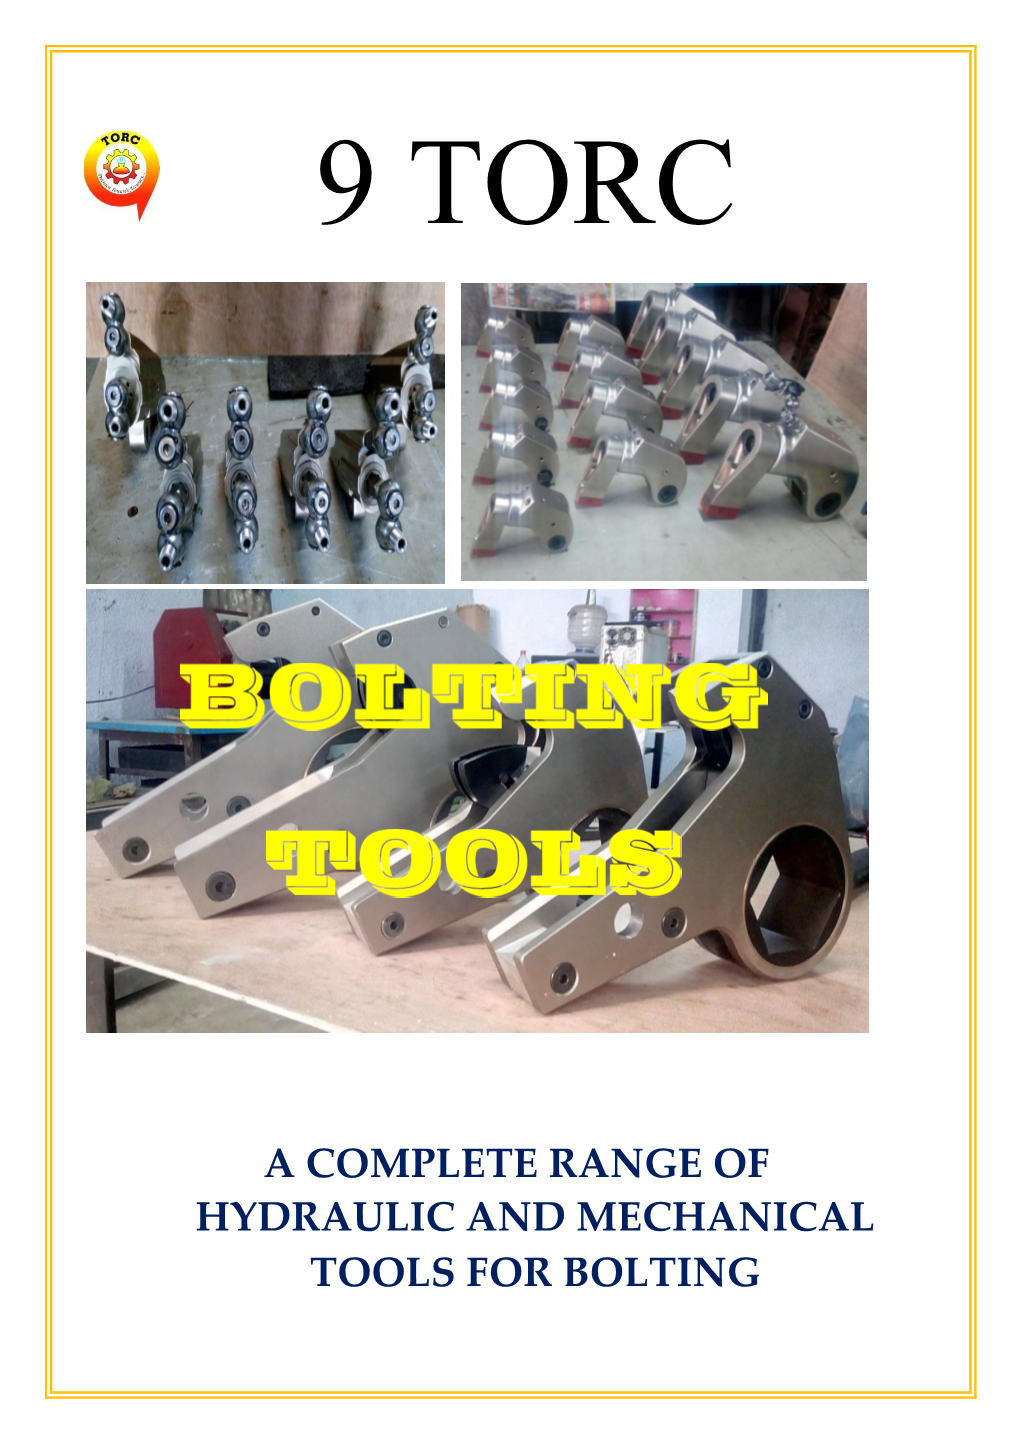 A COMPLETE RANGE of HYDRAULIC and MECHANICAL TOOLS for BOLTING 9 TORC Carries the Most Comprehensive Life of Bolting Tool Torque Wrenches